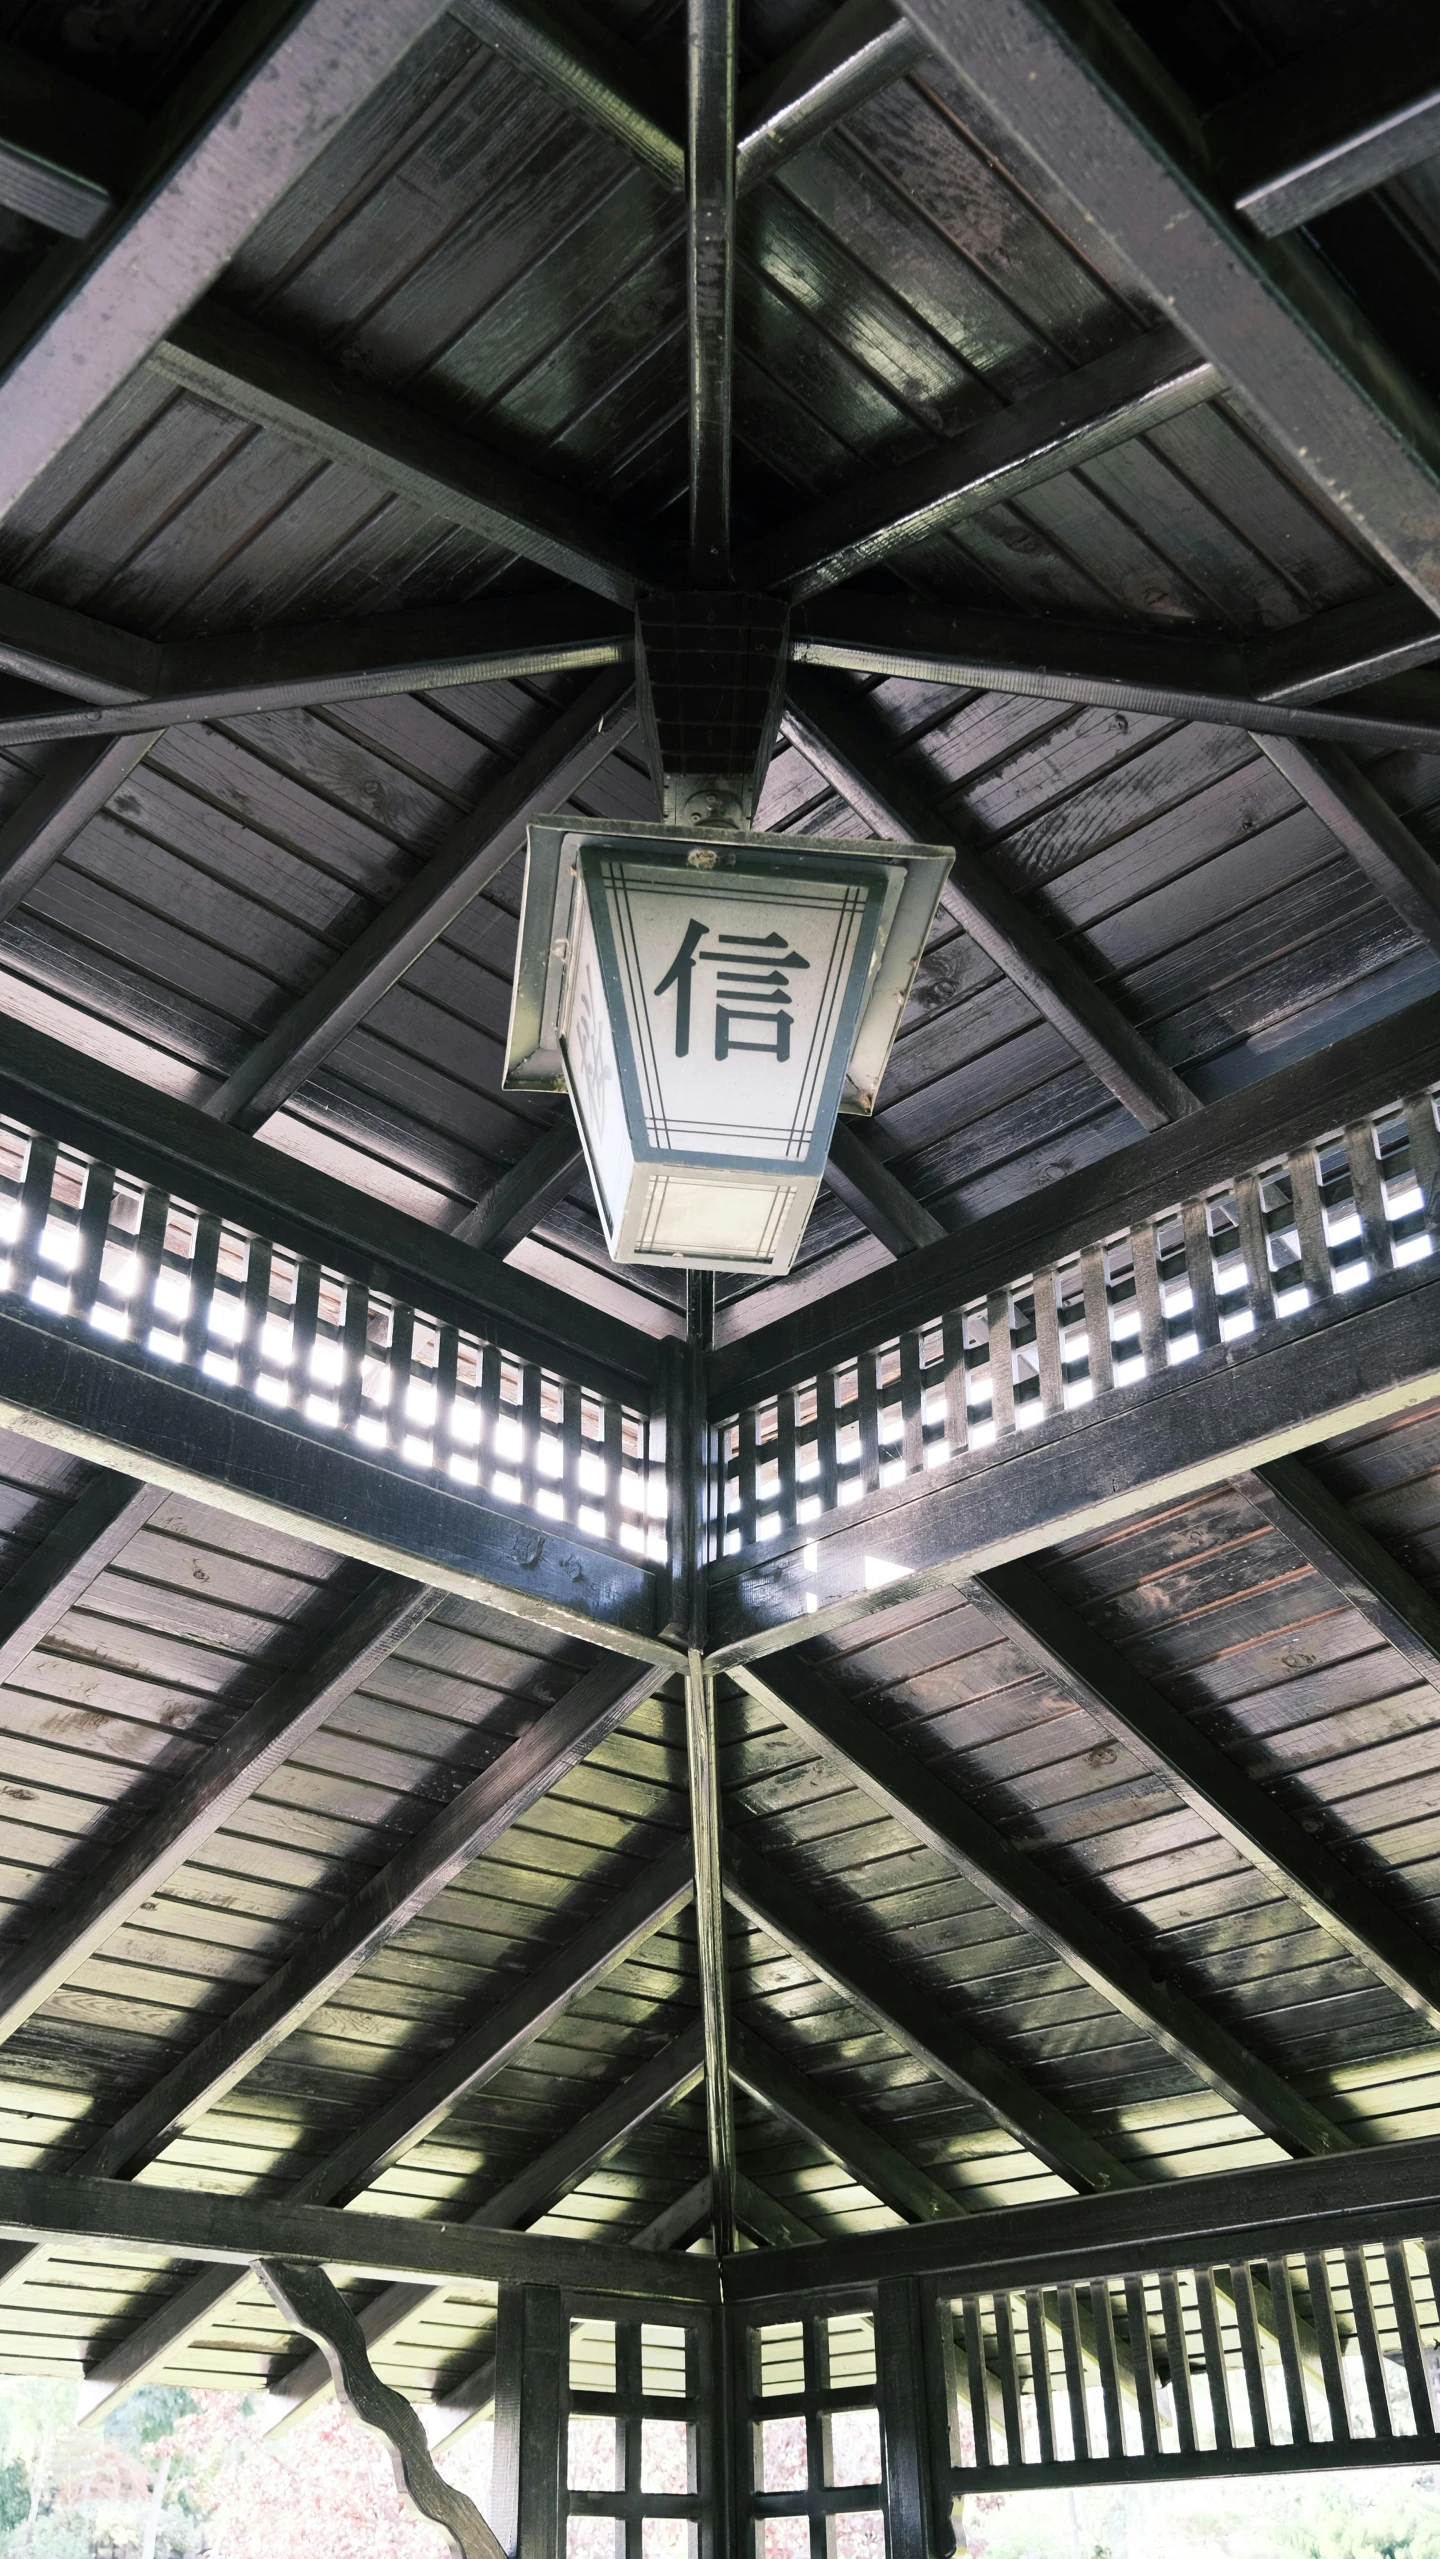 an indoor structure with a metal roof and a decorative light fixture on the ceiling